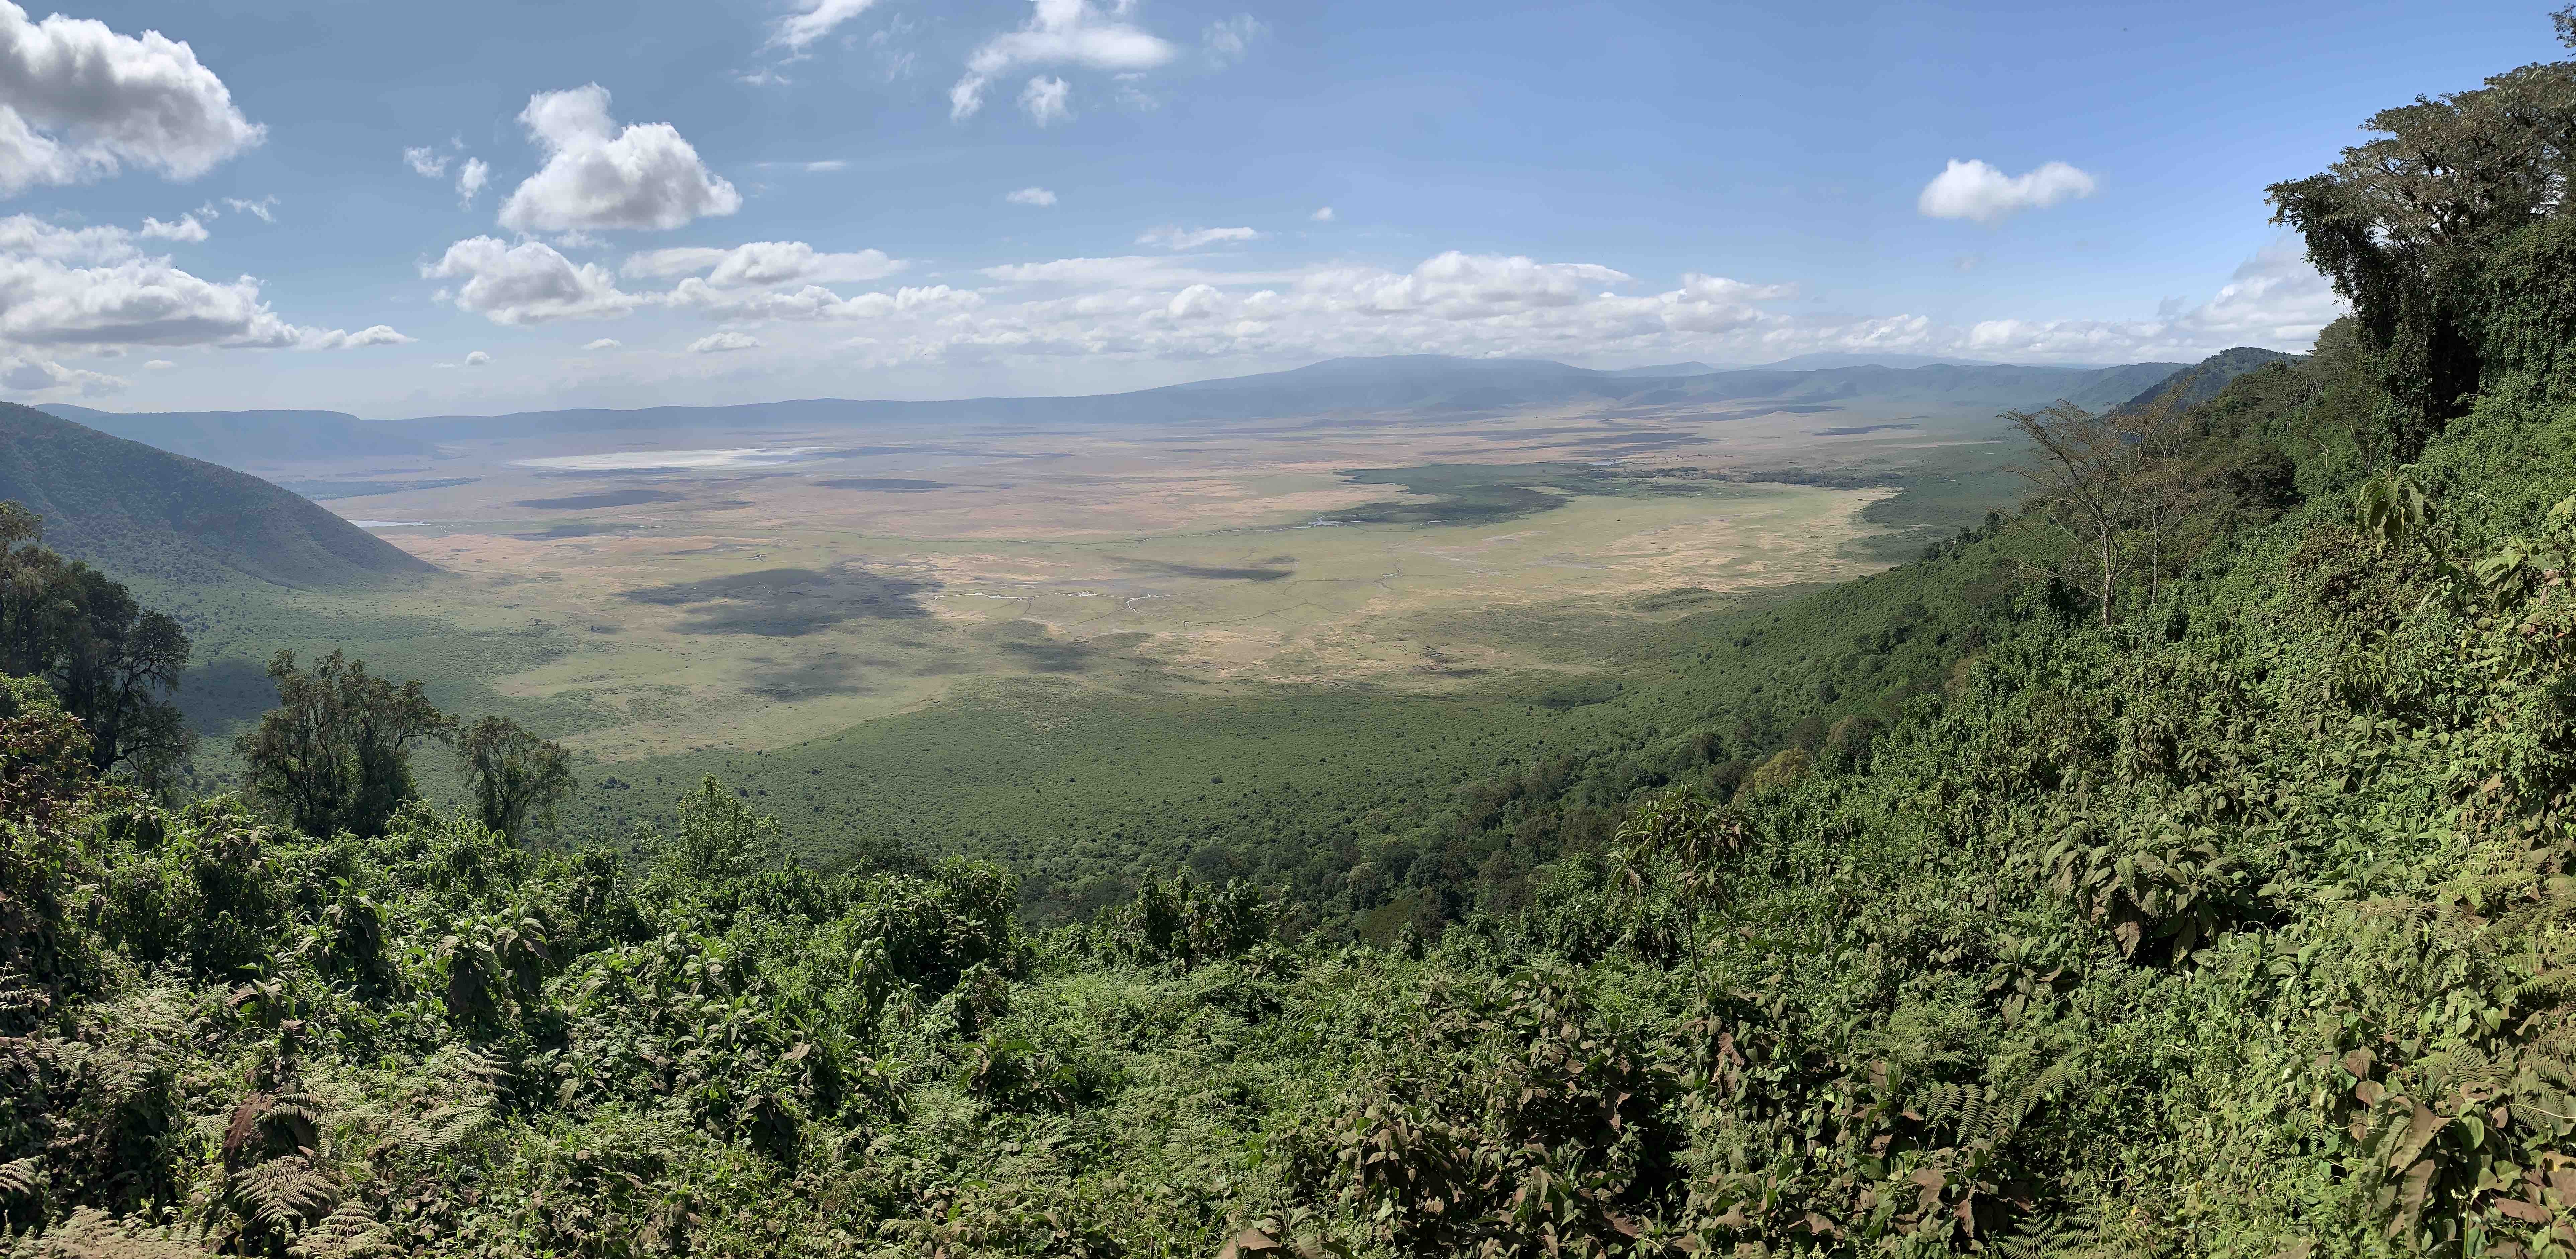 Landscape near the Northern Highlands Forest which encircles the Ngorongoro Crater